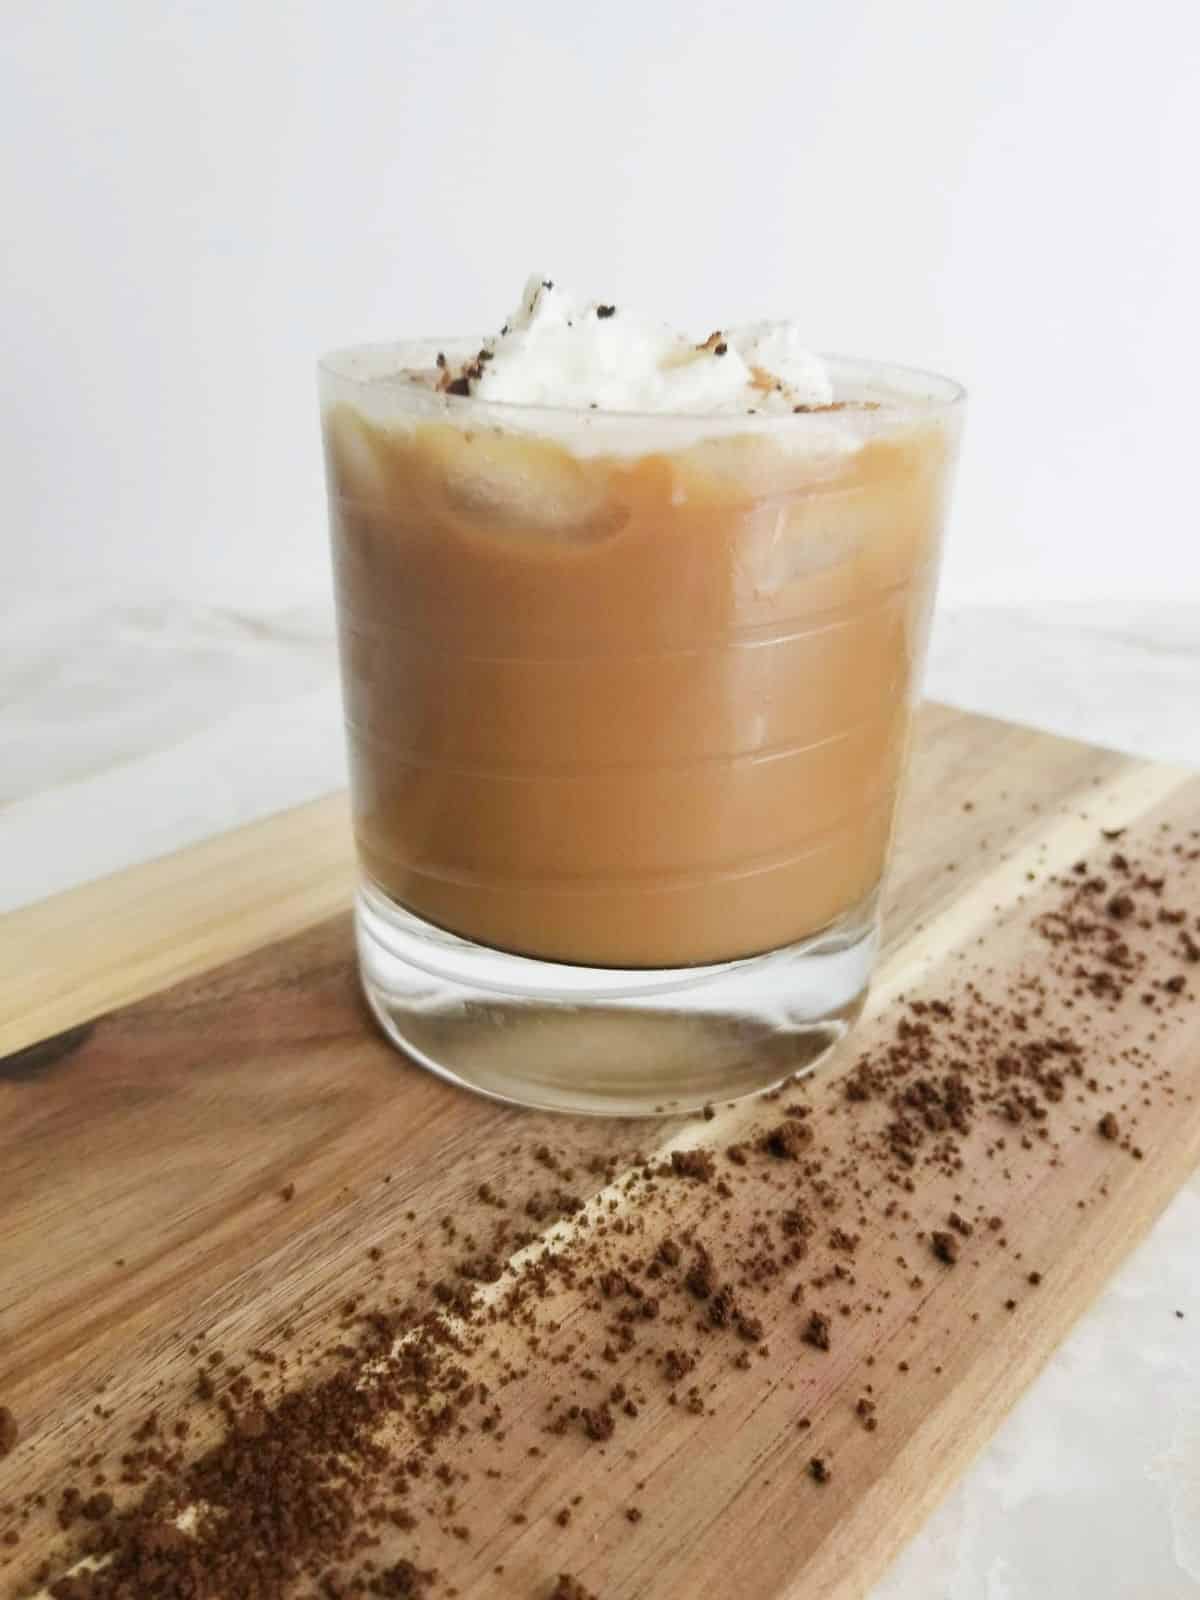 Iced Coffee topped with whipped cream and cinnamon in a glass on a wooden board.